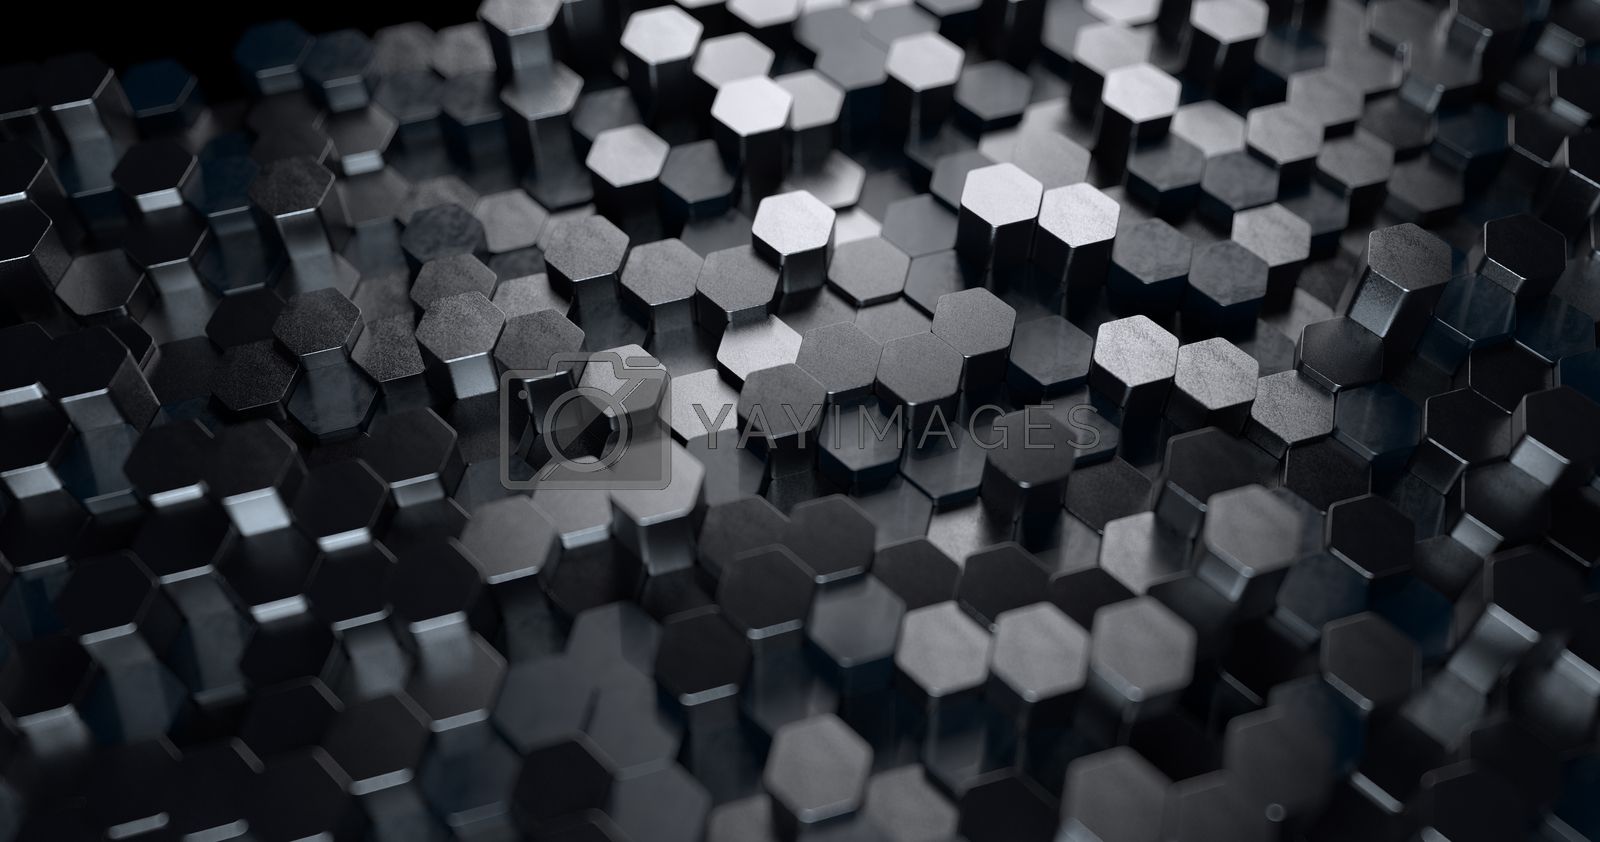 Abstract technological hexagonal background. 3D rendering. Geometric pattern. Graphic design elementfor wallpaper. Modern business card Royalty Free Stock Image. , Royalty Free Image, Vectors, Footage